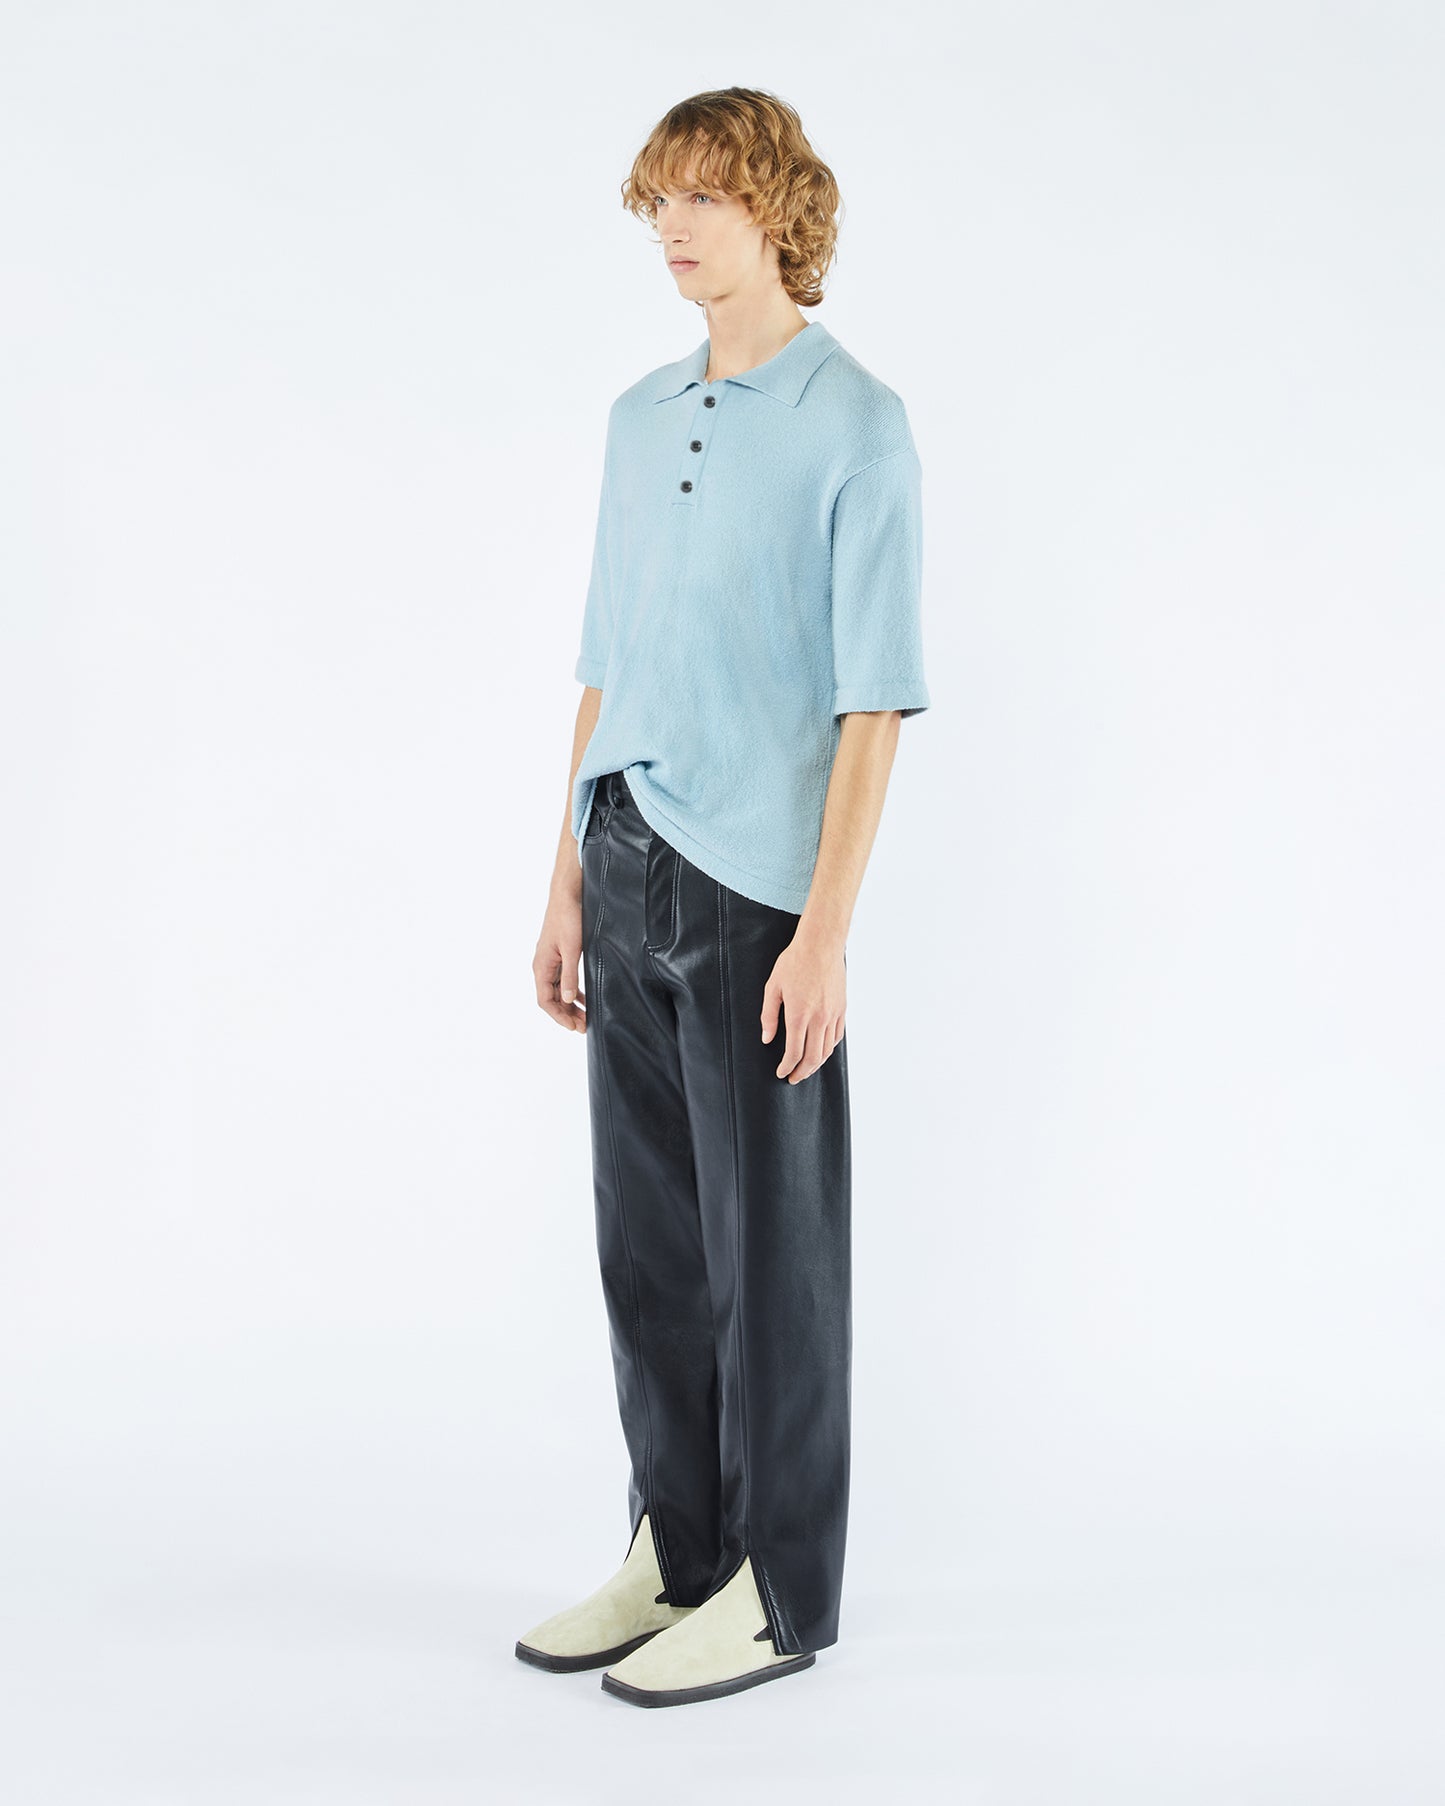 Carver - Archive Terry-Knit Polo Shirt - Sky